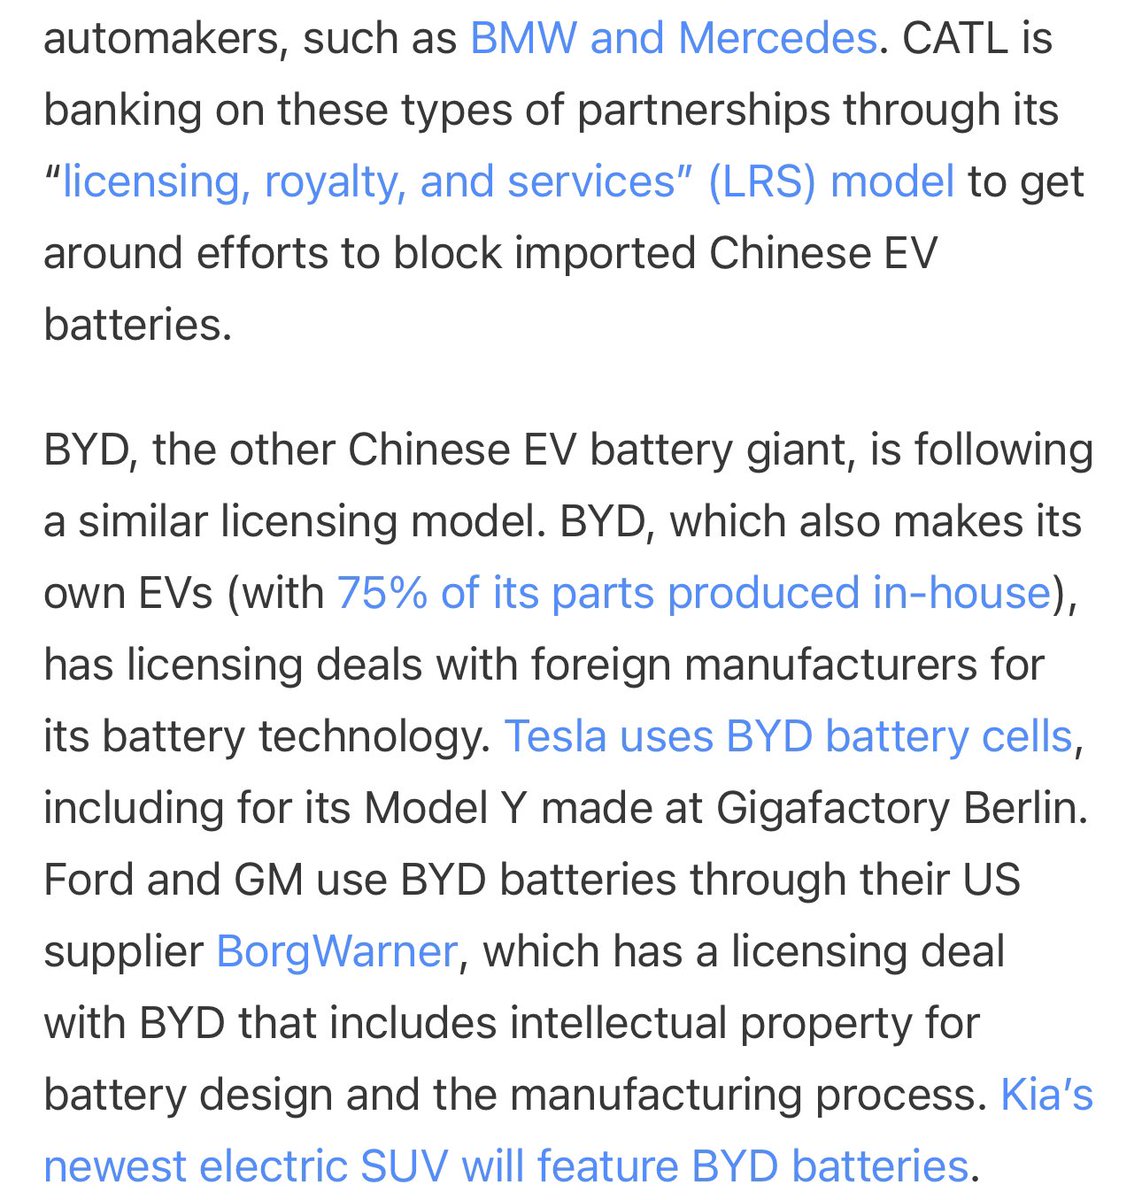 Chinese EV battery makers have already been working on ways to get around tariffs, as I mentioned in a recent High Capacity piece.

CATL is pursuing a “licensing, royalty, and services” model. BYD is also doing licensing deals.